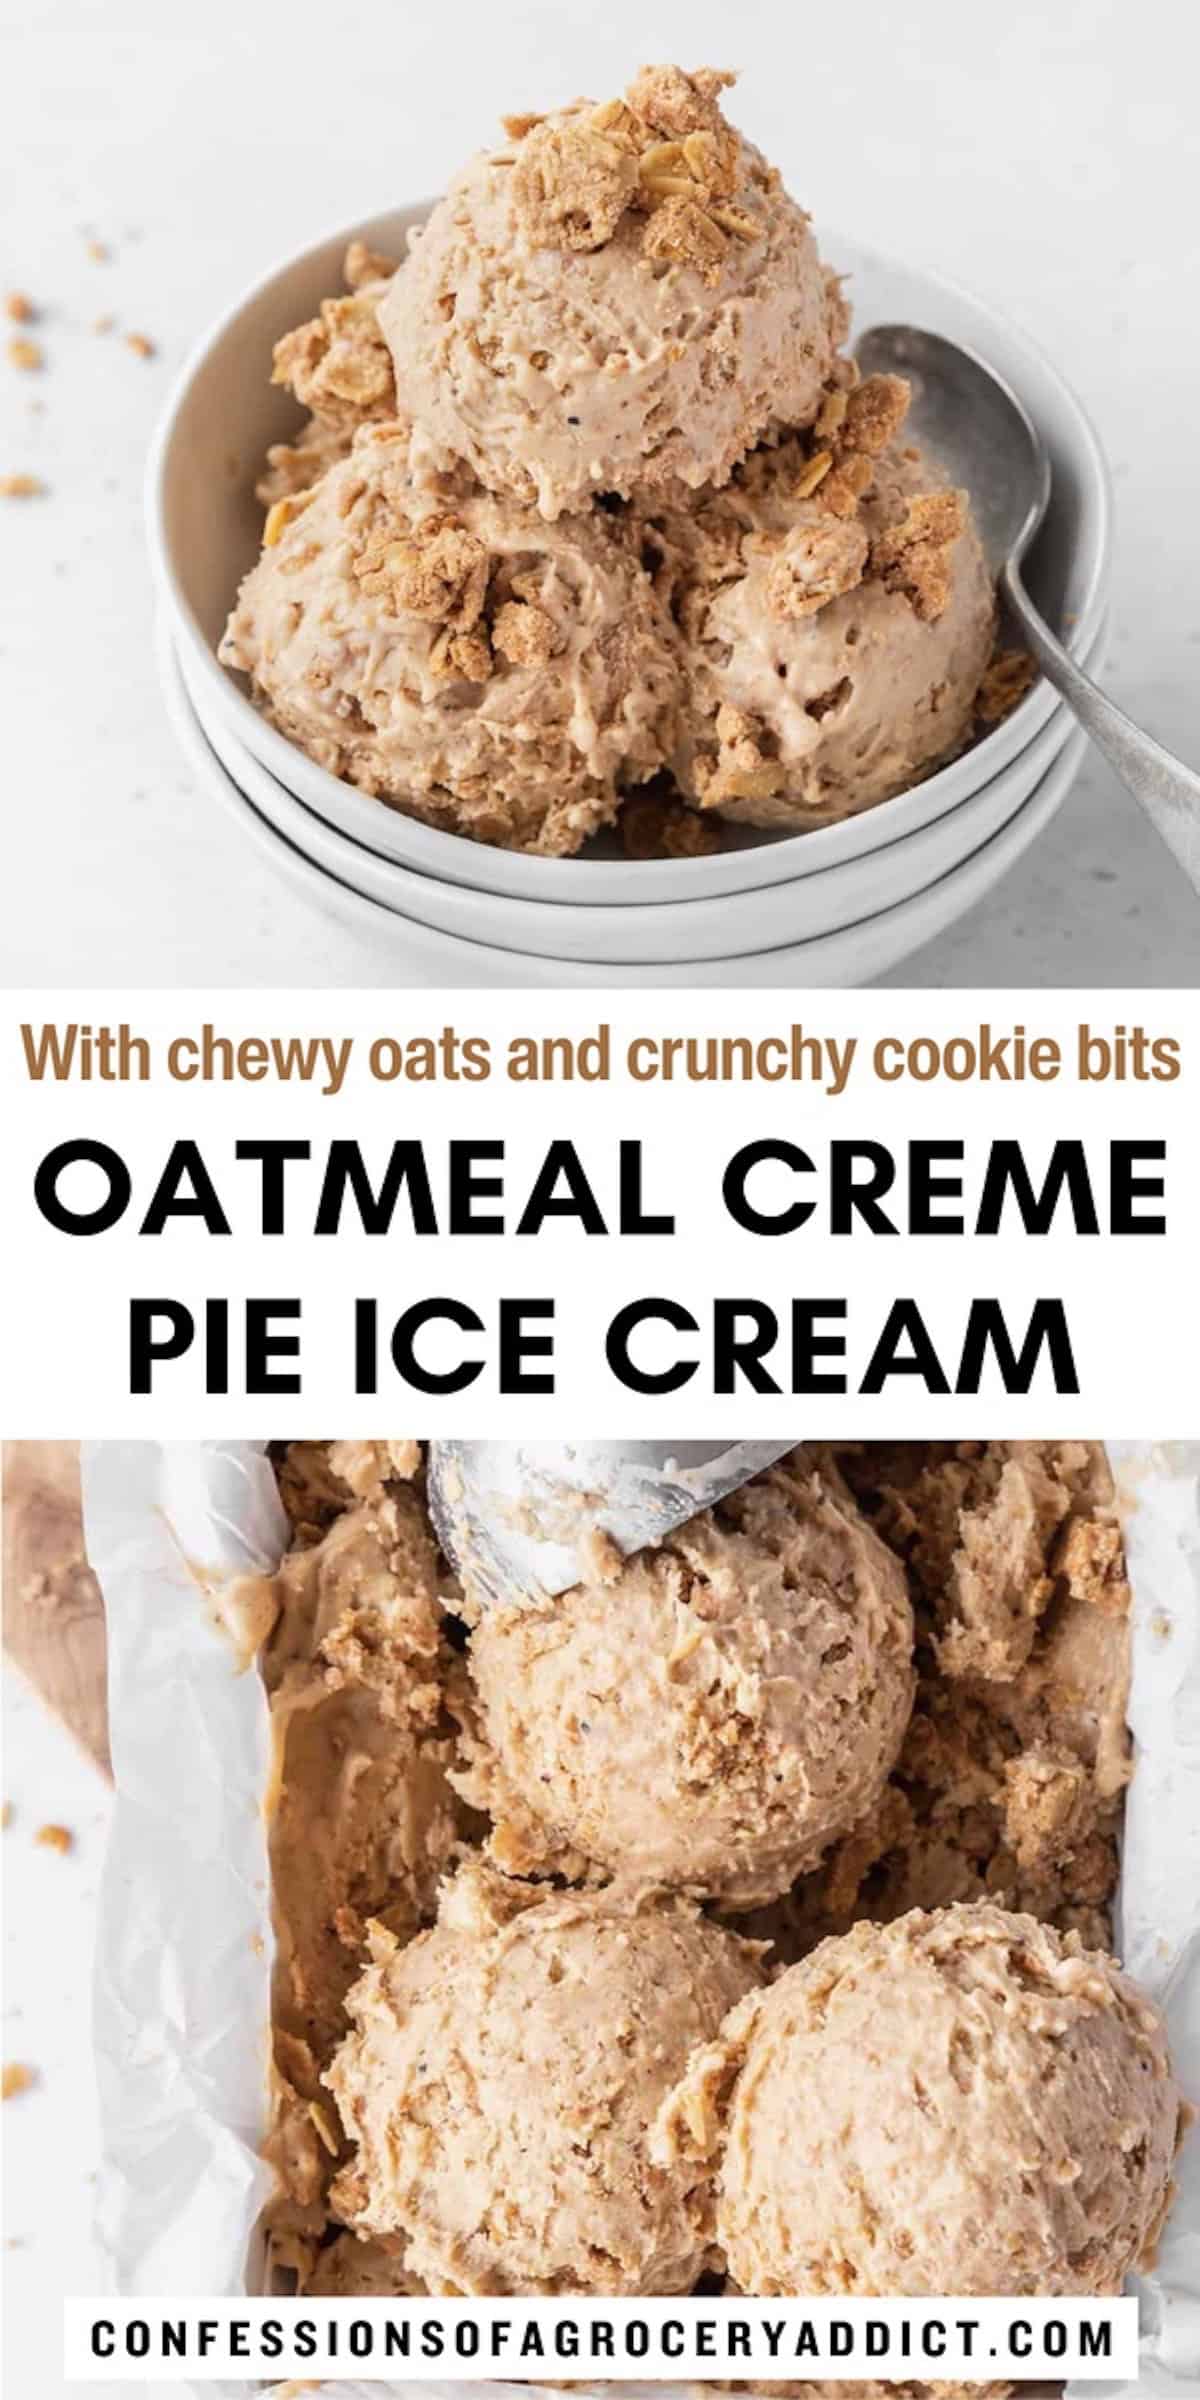 vertical pinterest pin with two images (a stack of white bowls with the top one filled with 4 scoops of ice cream and the bottom of an ice cream scoop scooping 3 scoops of ice cream from a loaf tin) with text overlay that reads "with chewy oats and crunchy cookie bits; oatmeal creme pie ice cream."